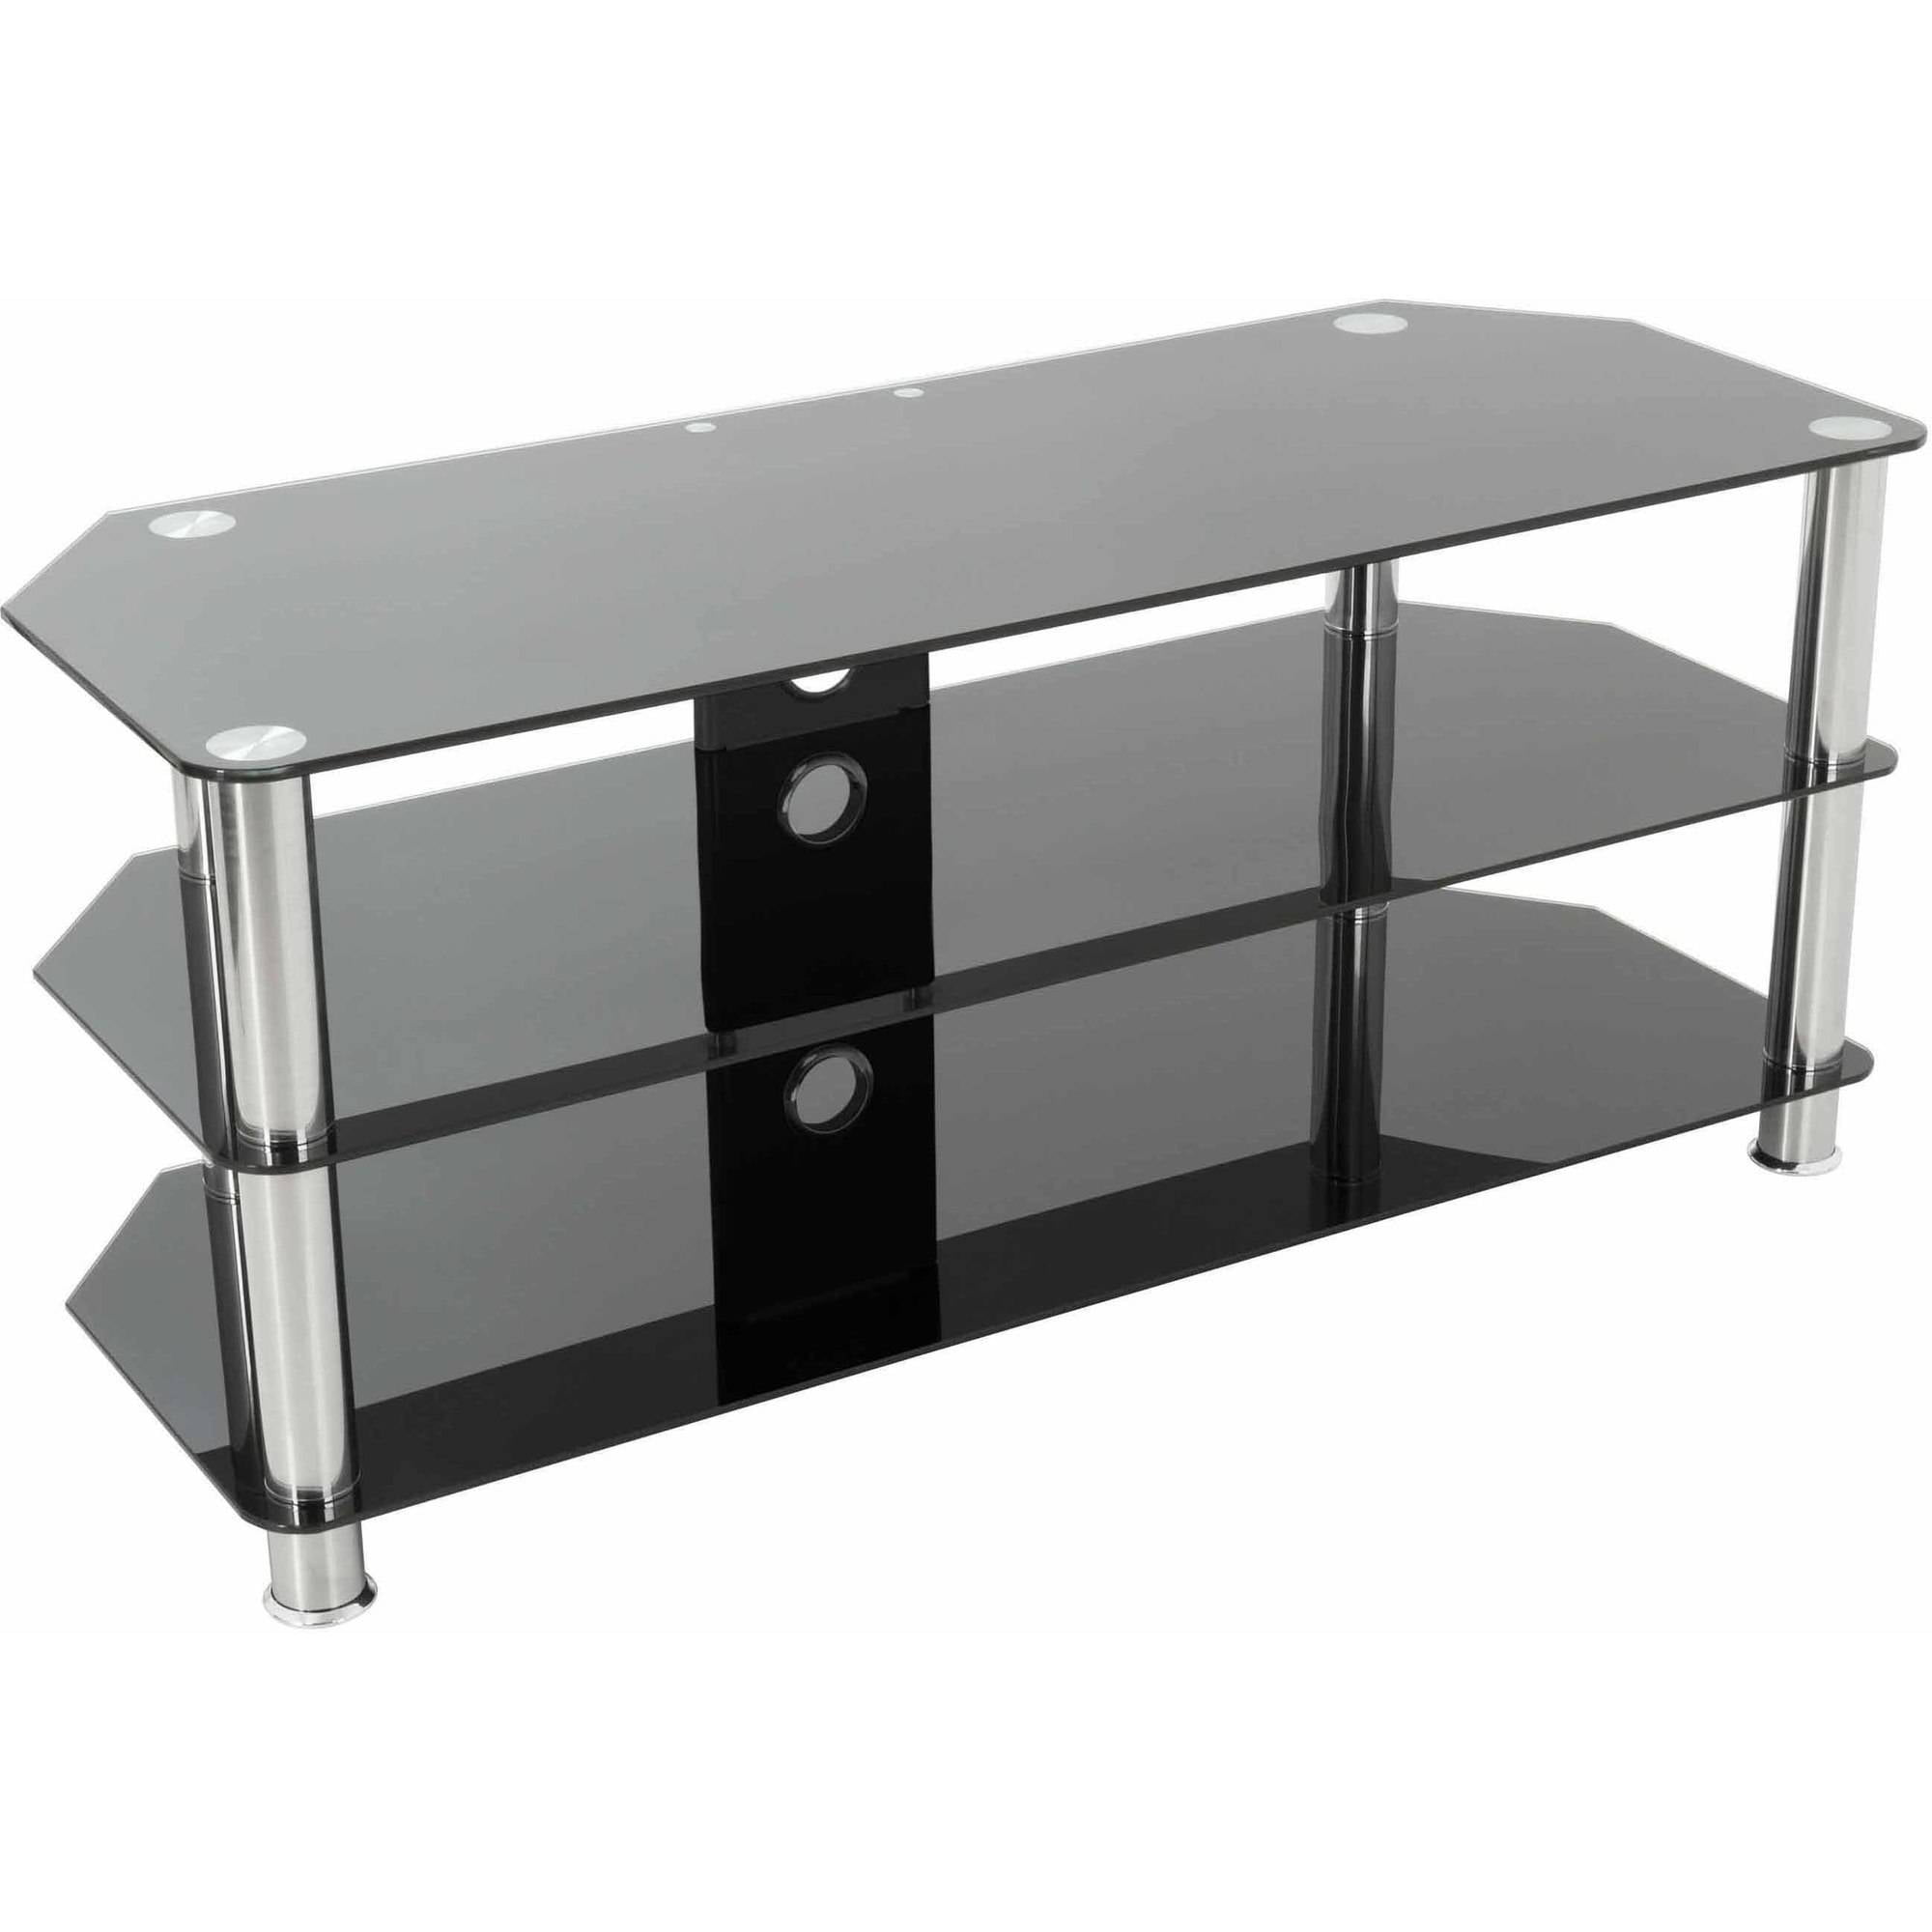 Avf Classic Corner Glass Tv Stand With Cable Management For Up To